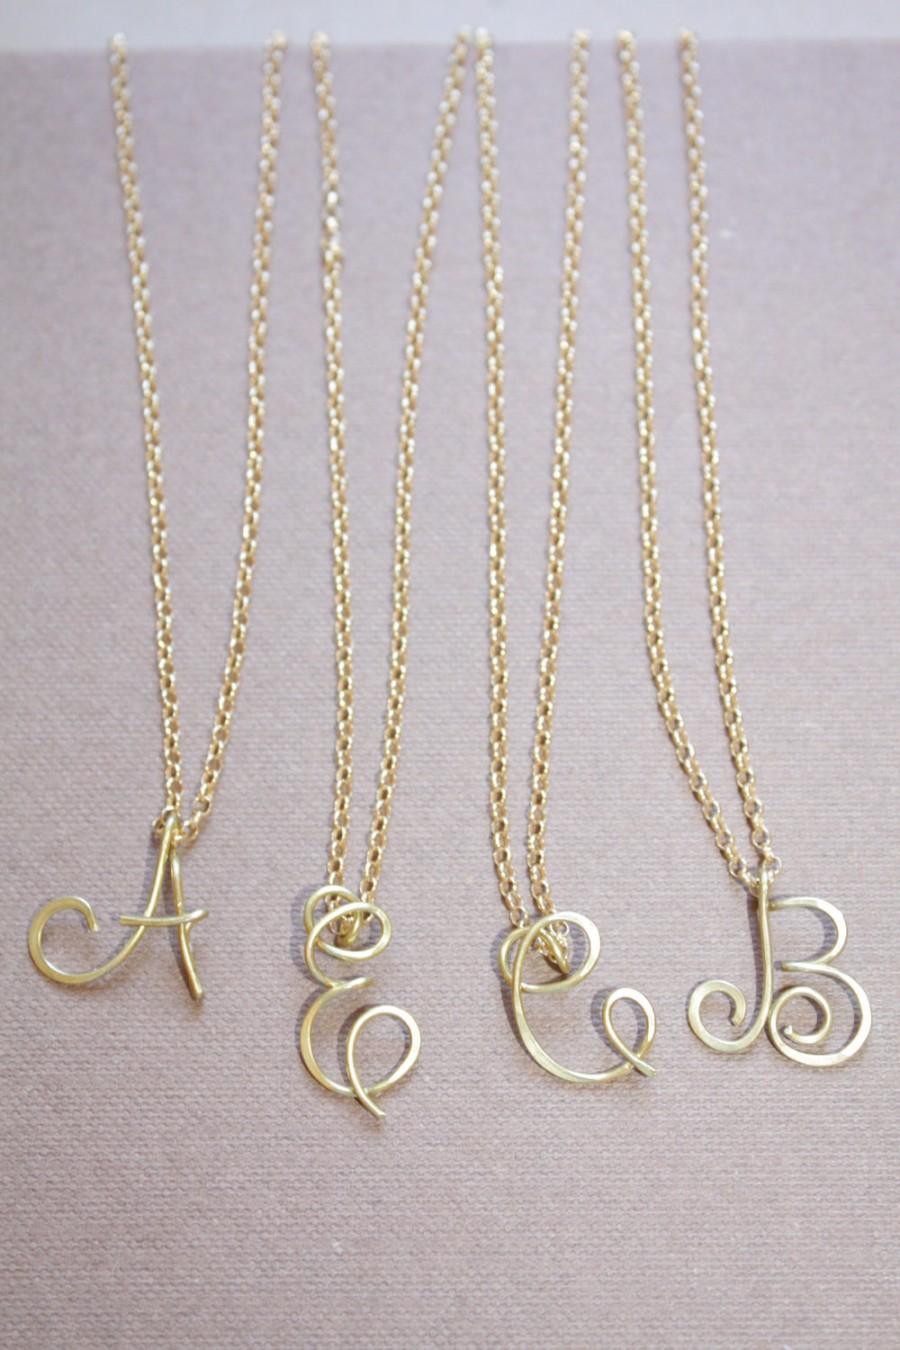 Mariage - Uppercase Initial Letter Necklace Personalized Cursive Letter Necklace Gold Letter Necklace Silver Initial Necklace Cursive Letter Di&De